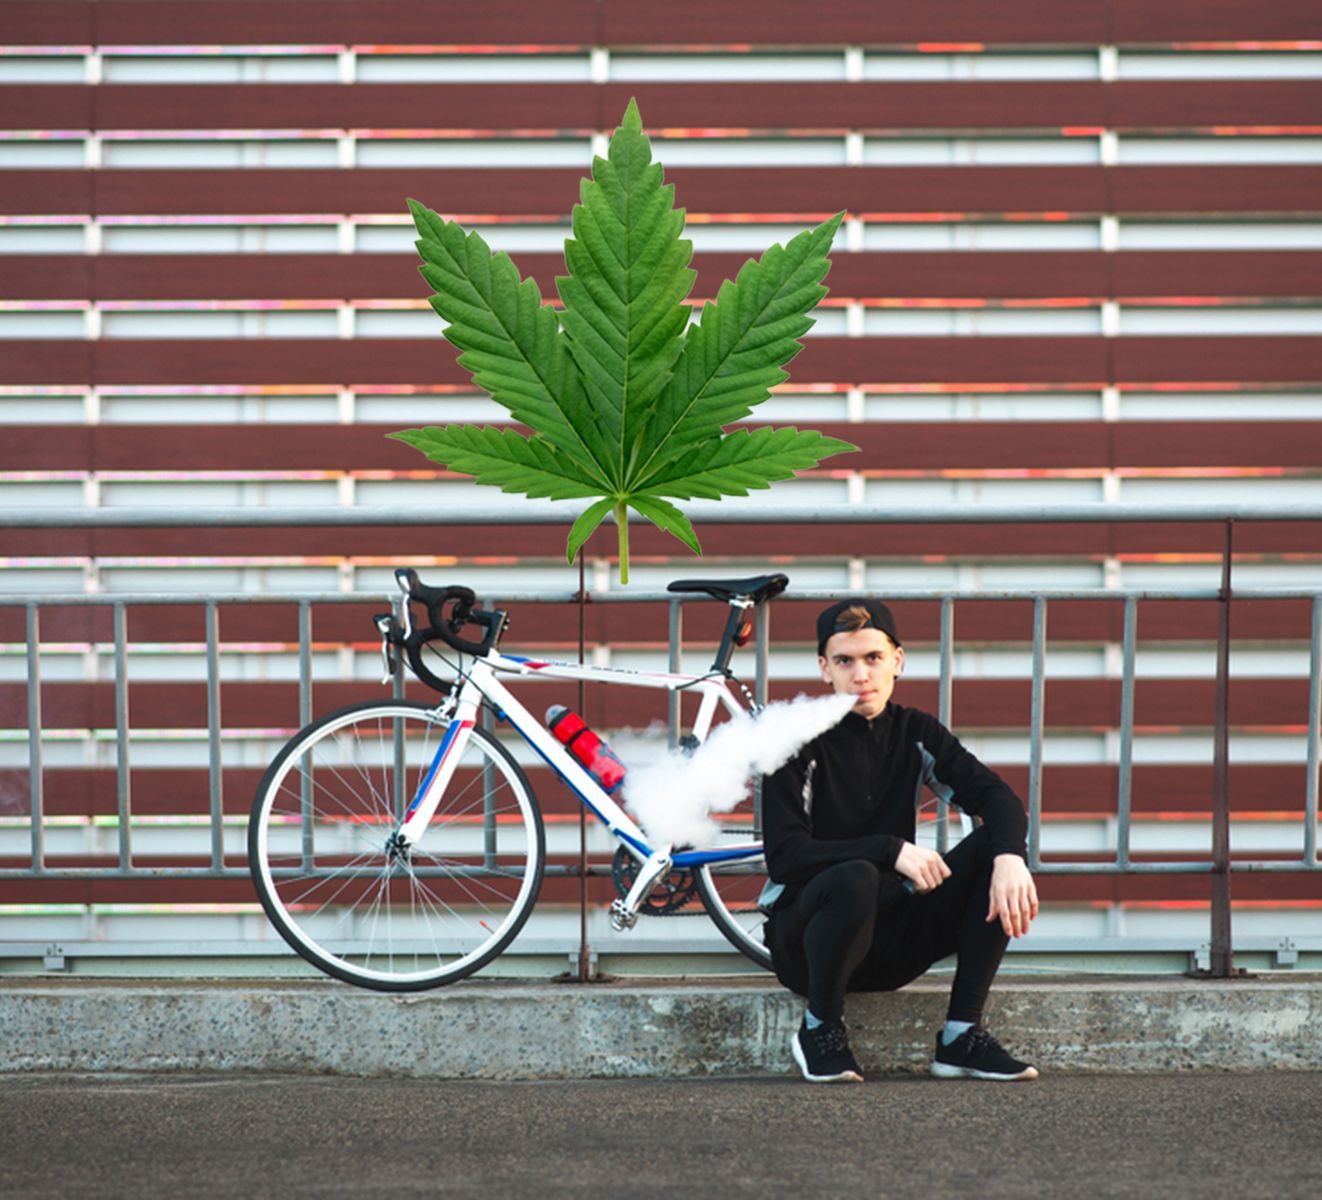 Cycling Under the Influence: Marijuana DUI and Bicycle Accidents